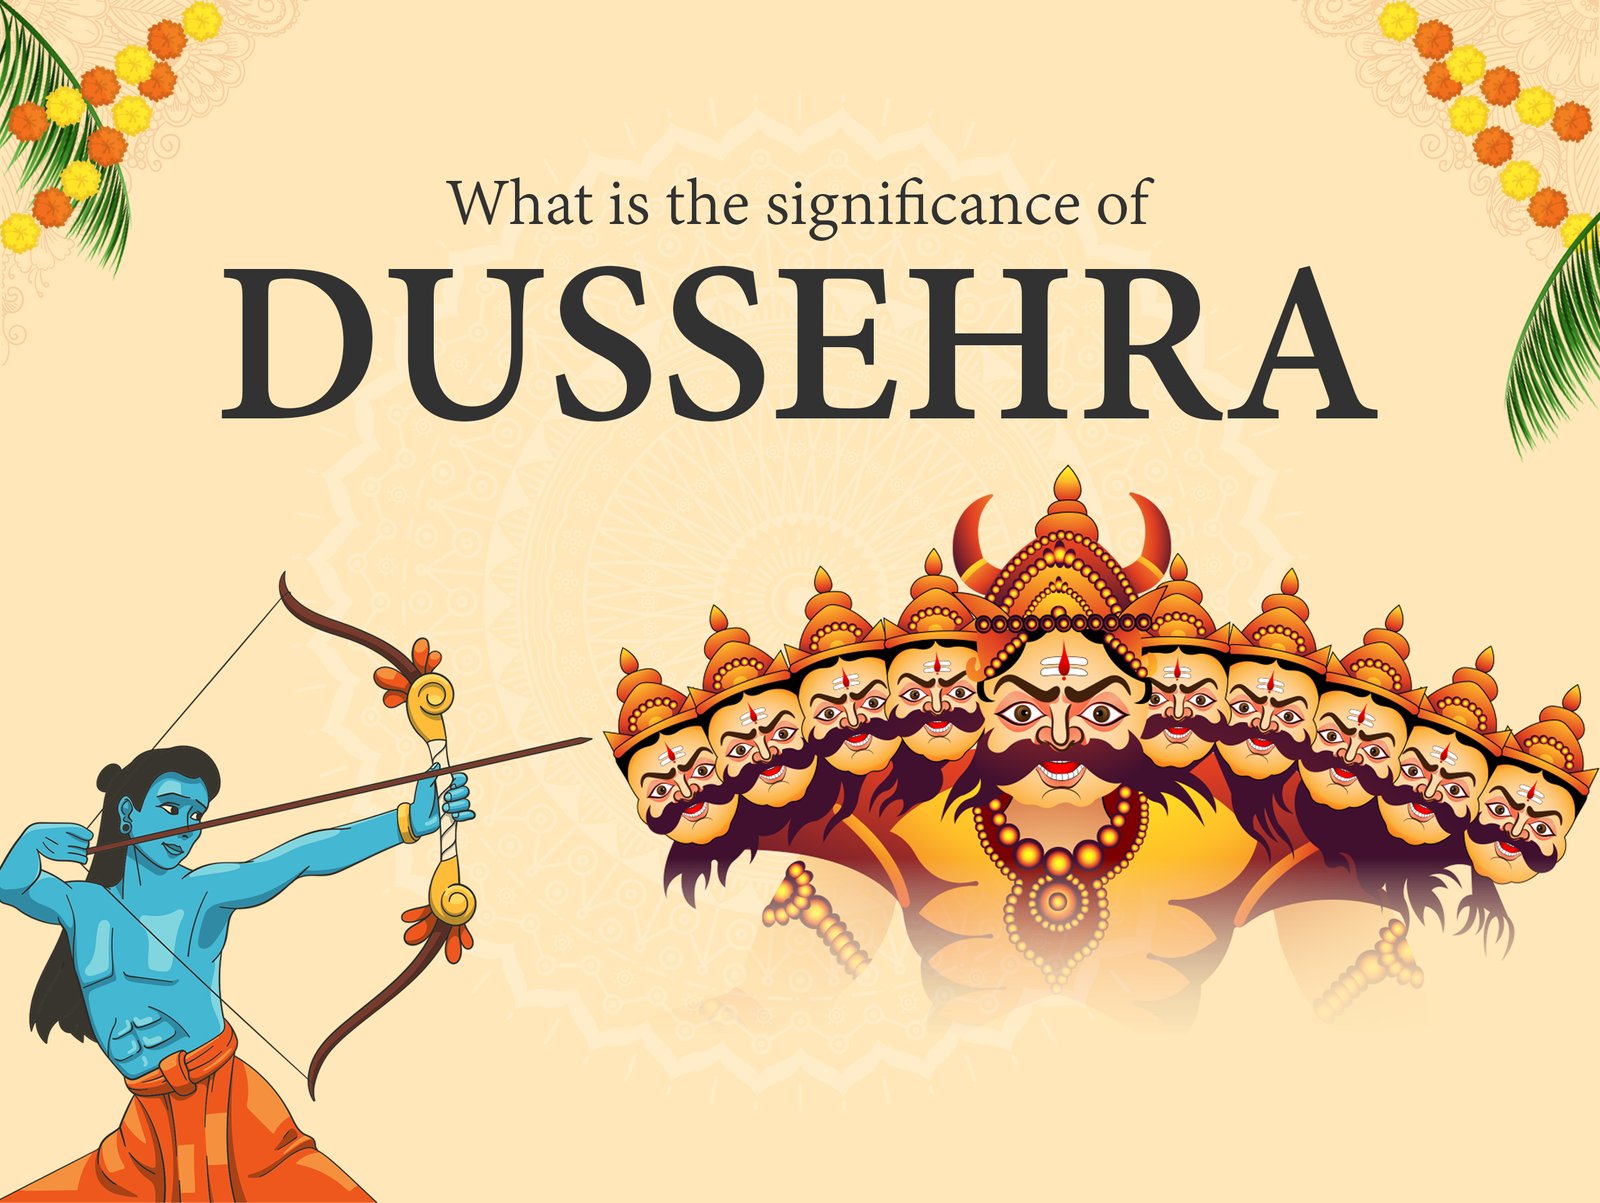 What is the significance of Dussehra poster